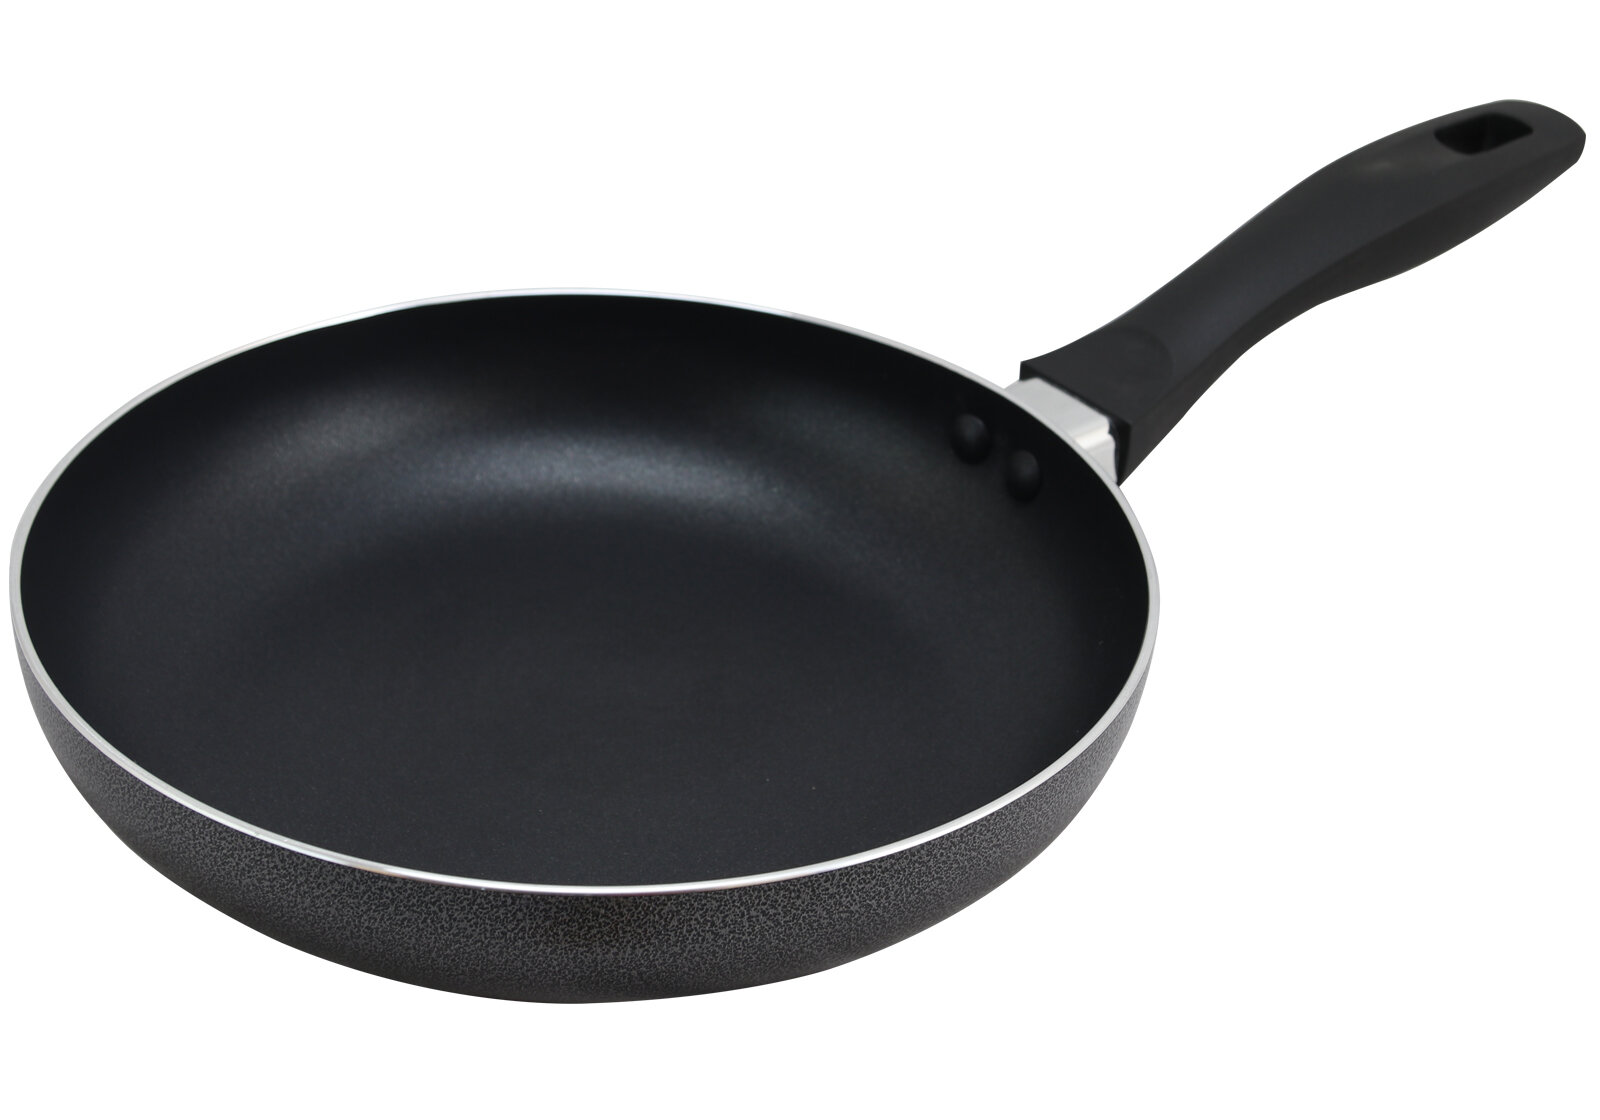 Oster 3 Quart Non Stick Aluminum Everyday Pan with Lid